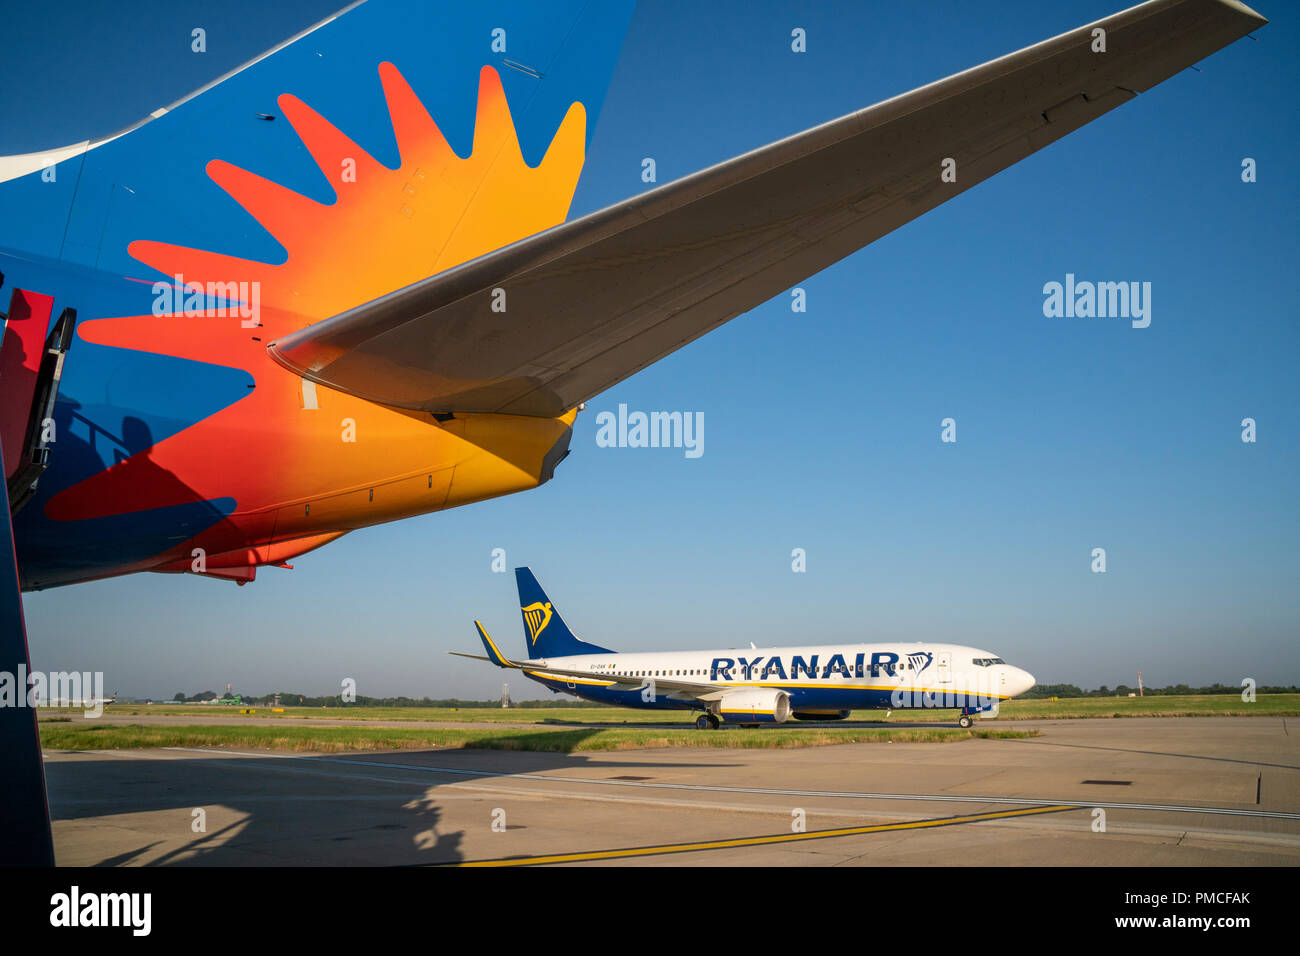 Ryanair aircraft passing by the tail of a rival Jet2 aircraft Stock Photo